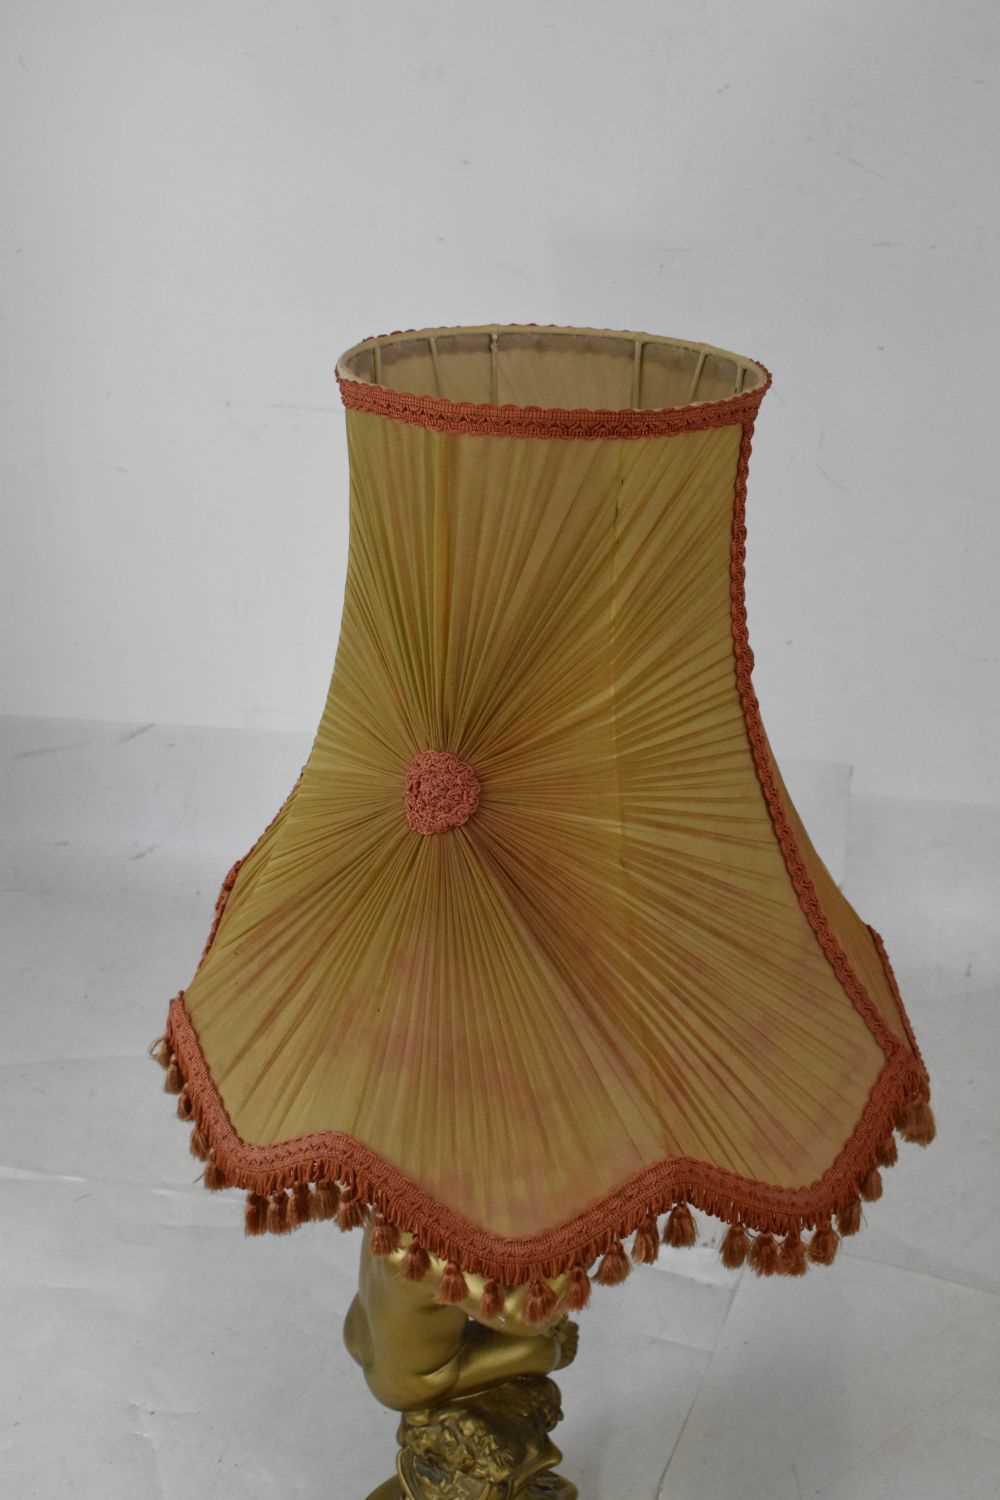 Plaster gilt figural lamp base with shade - Image 7 of 7